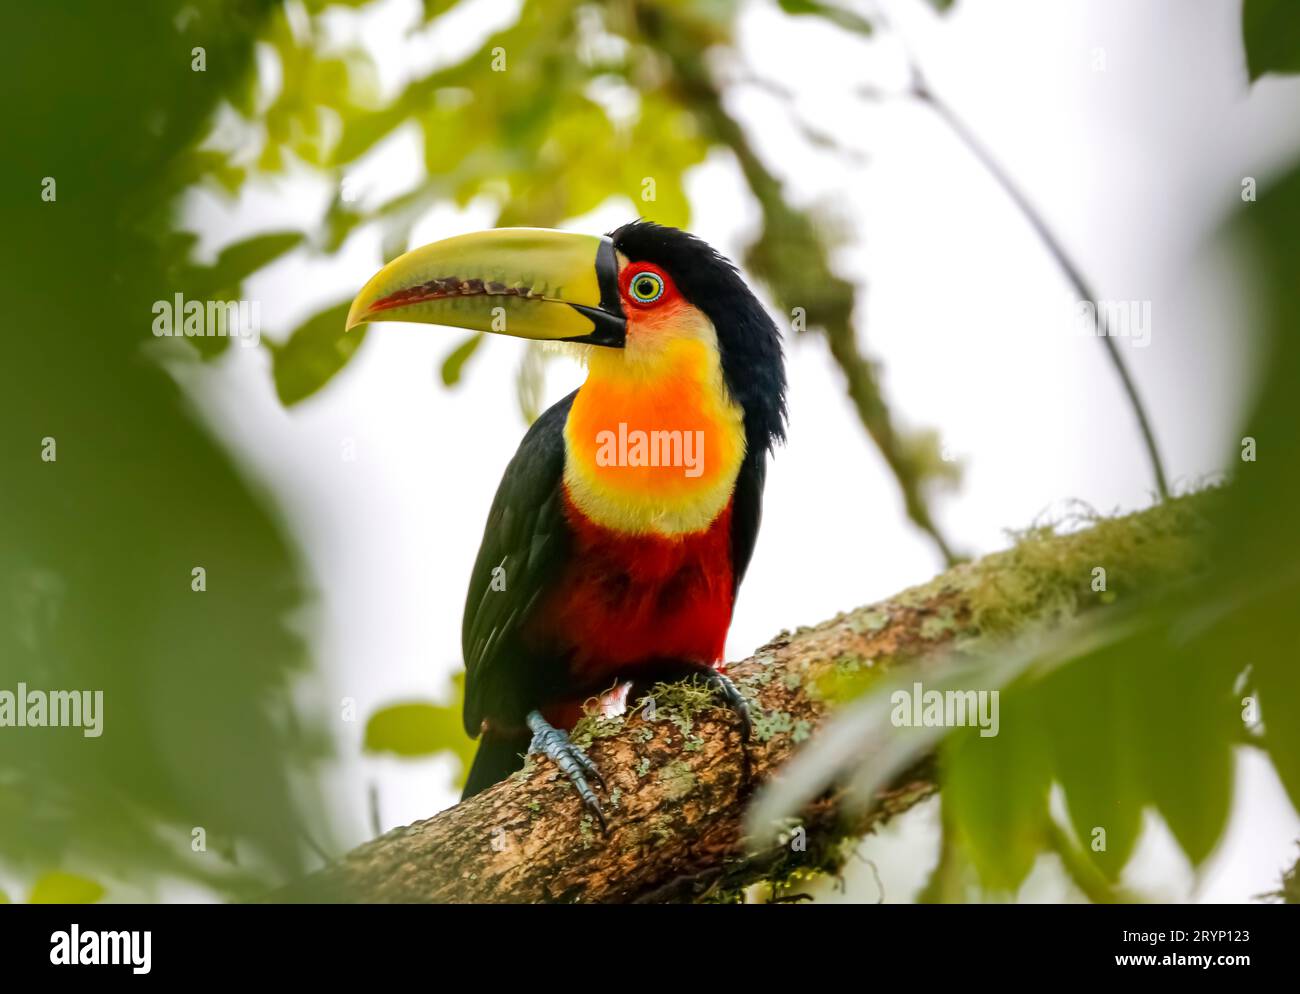 Close-up of a beautiful Red-breasted toucan perched on a tree branch, framed with green defocused le Stock Photo